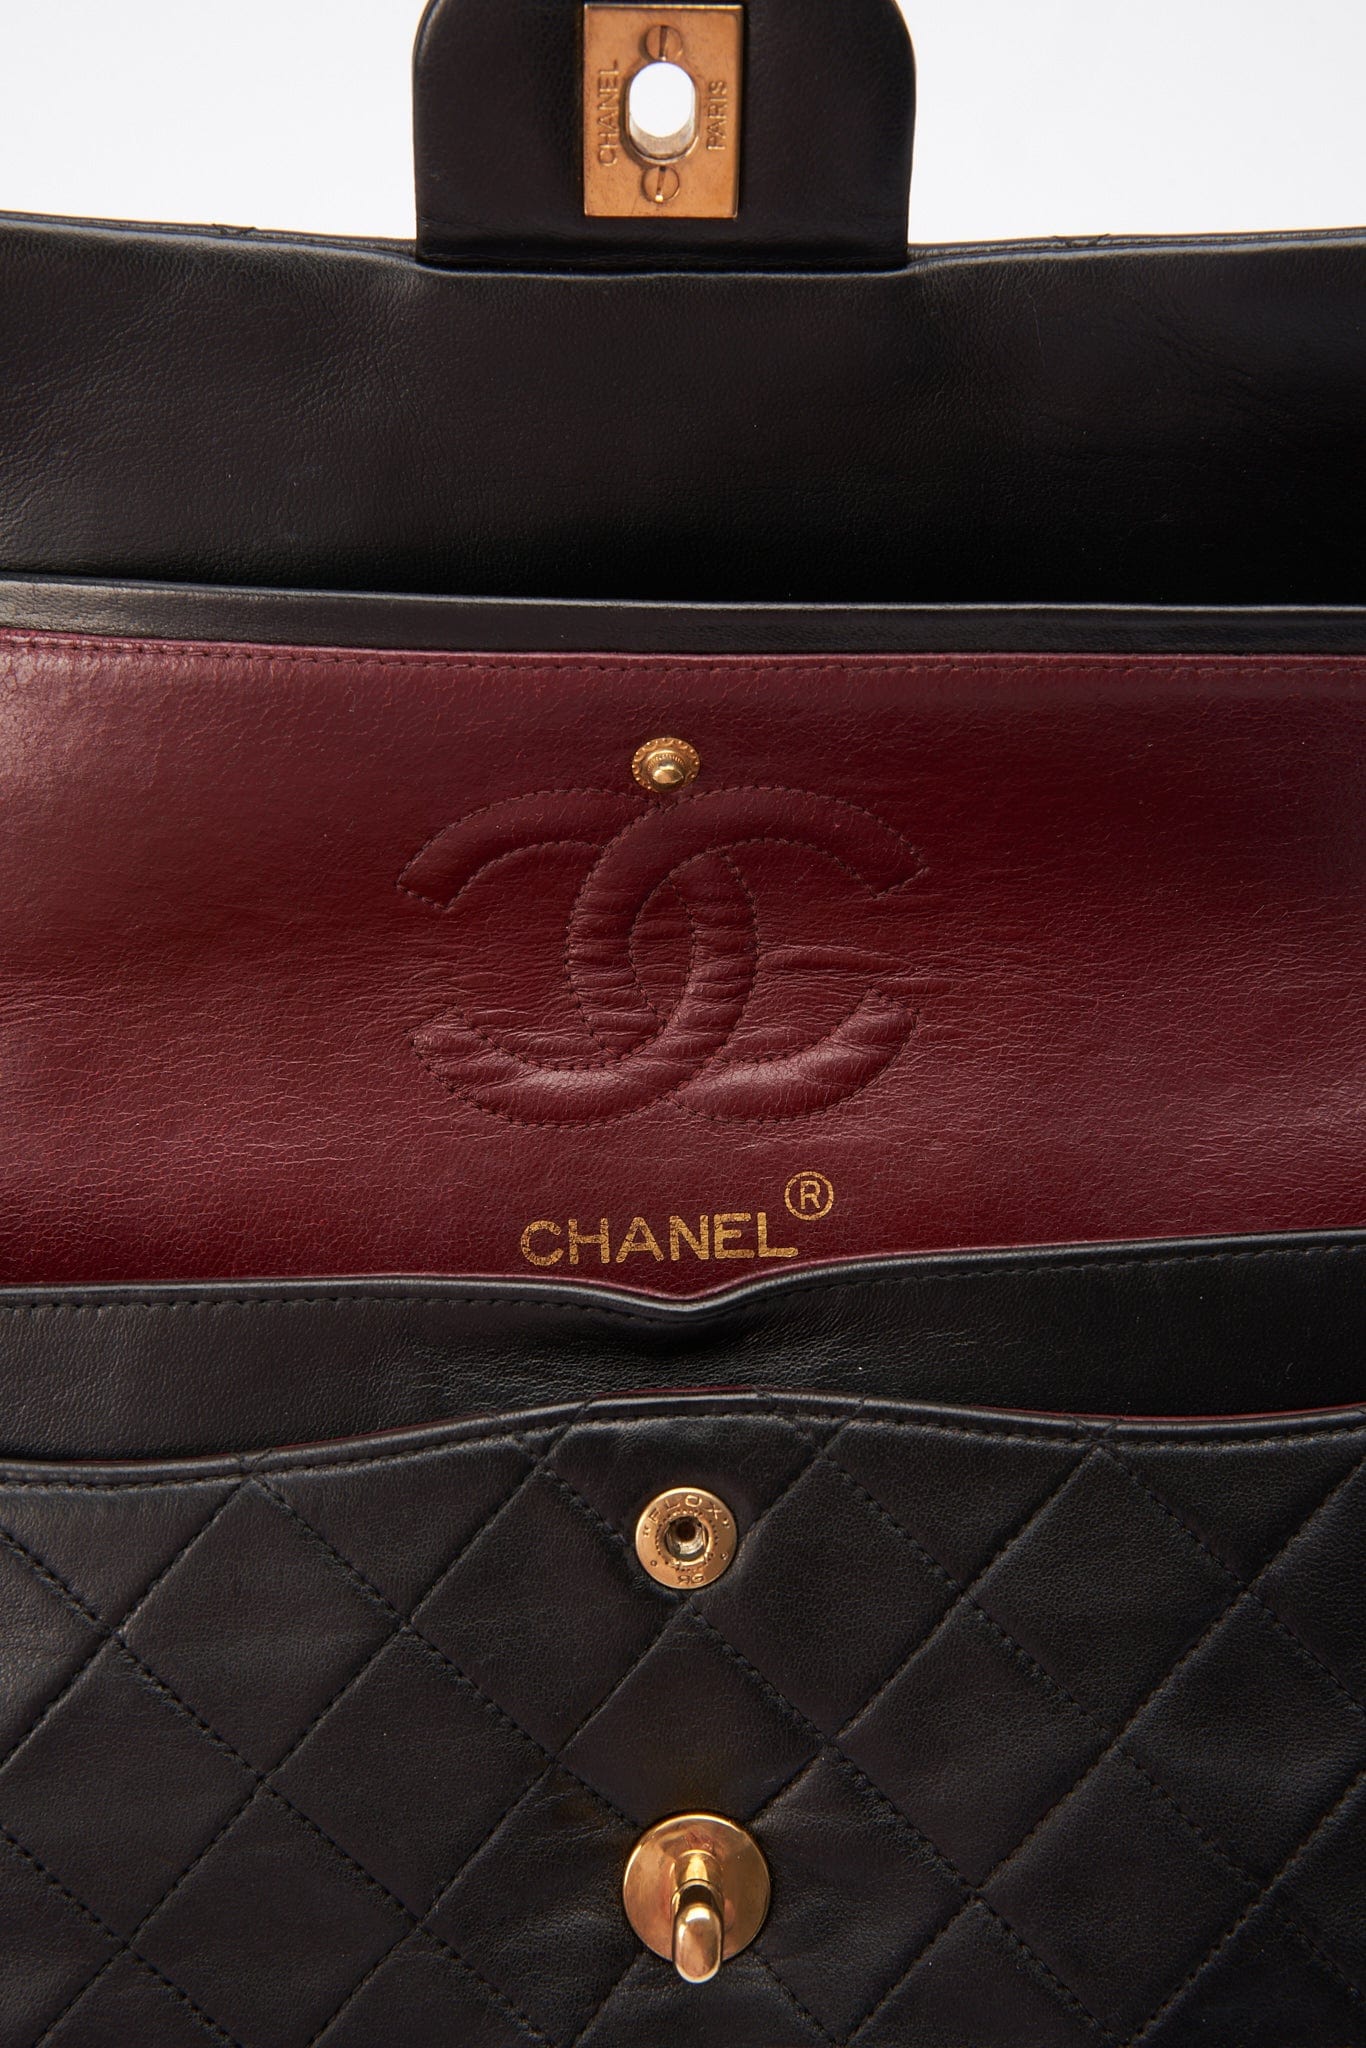 Chanel Classic Double Flap Bag Small Black Lambskin Leather